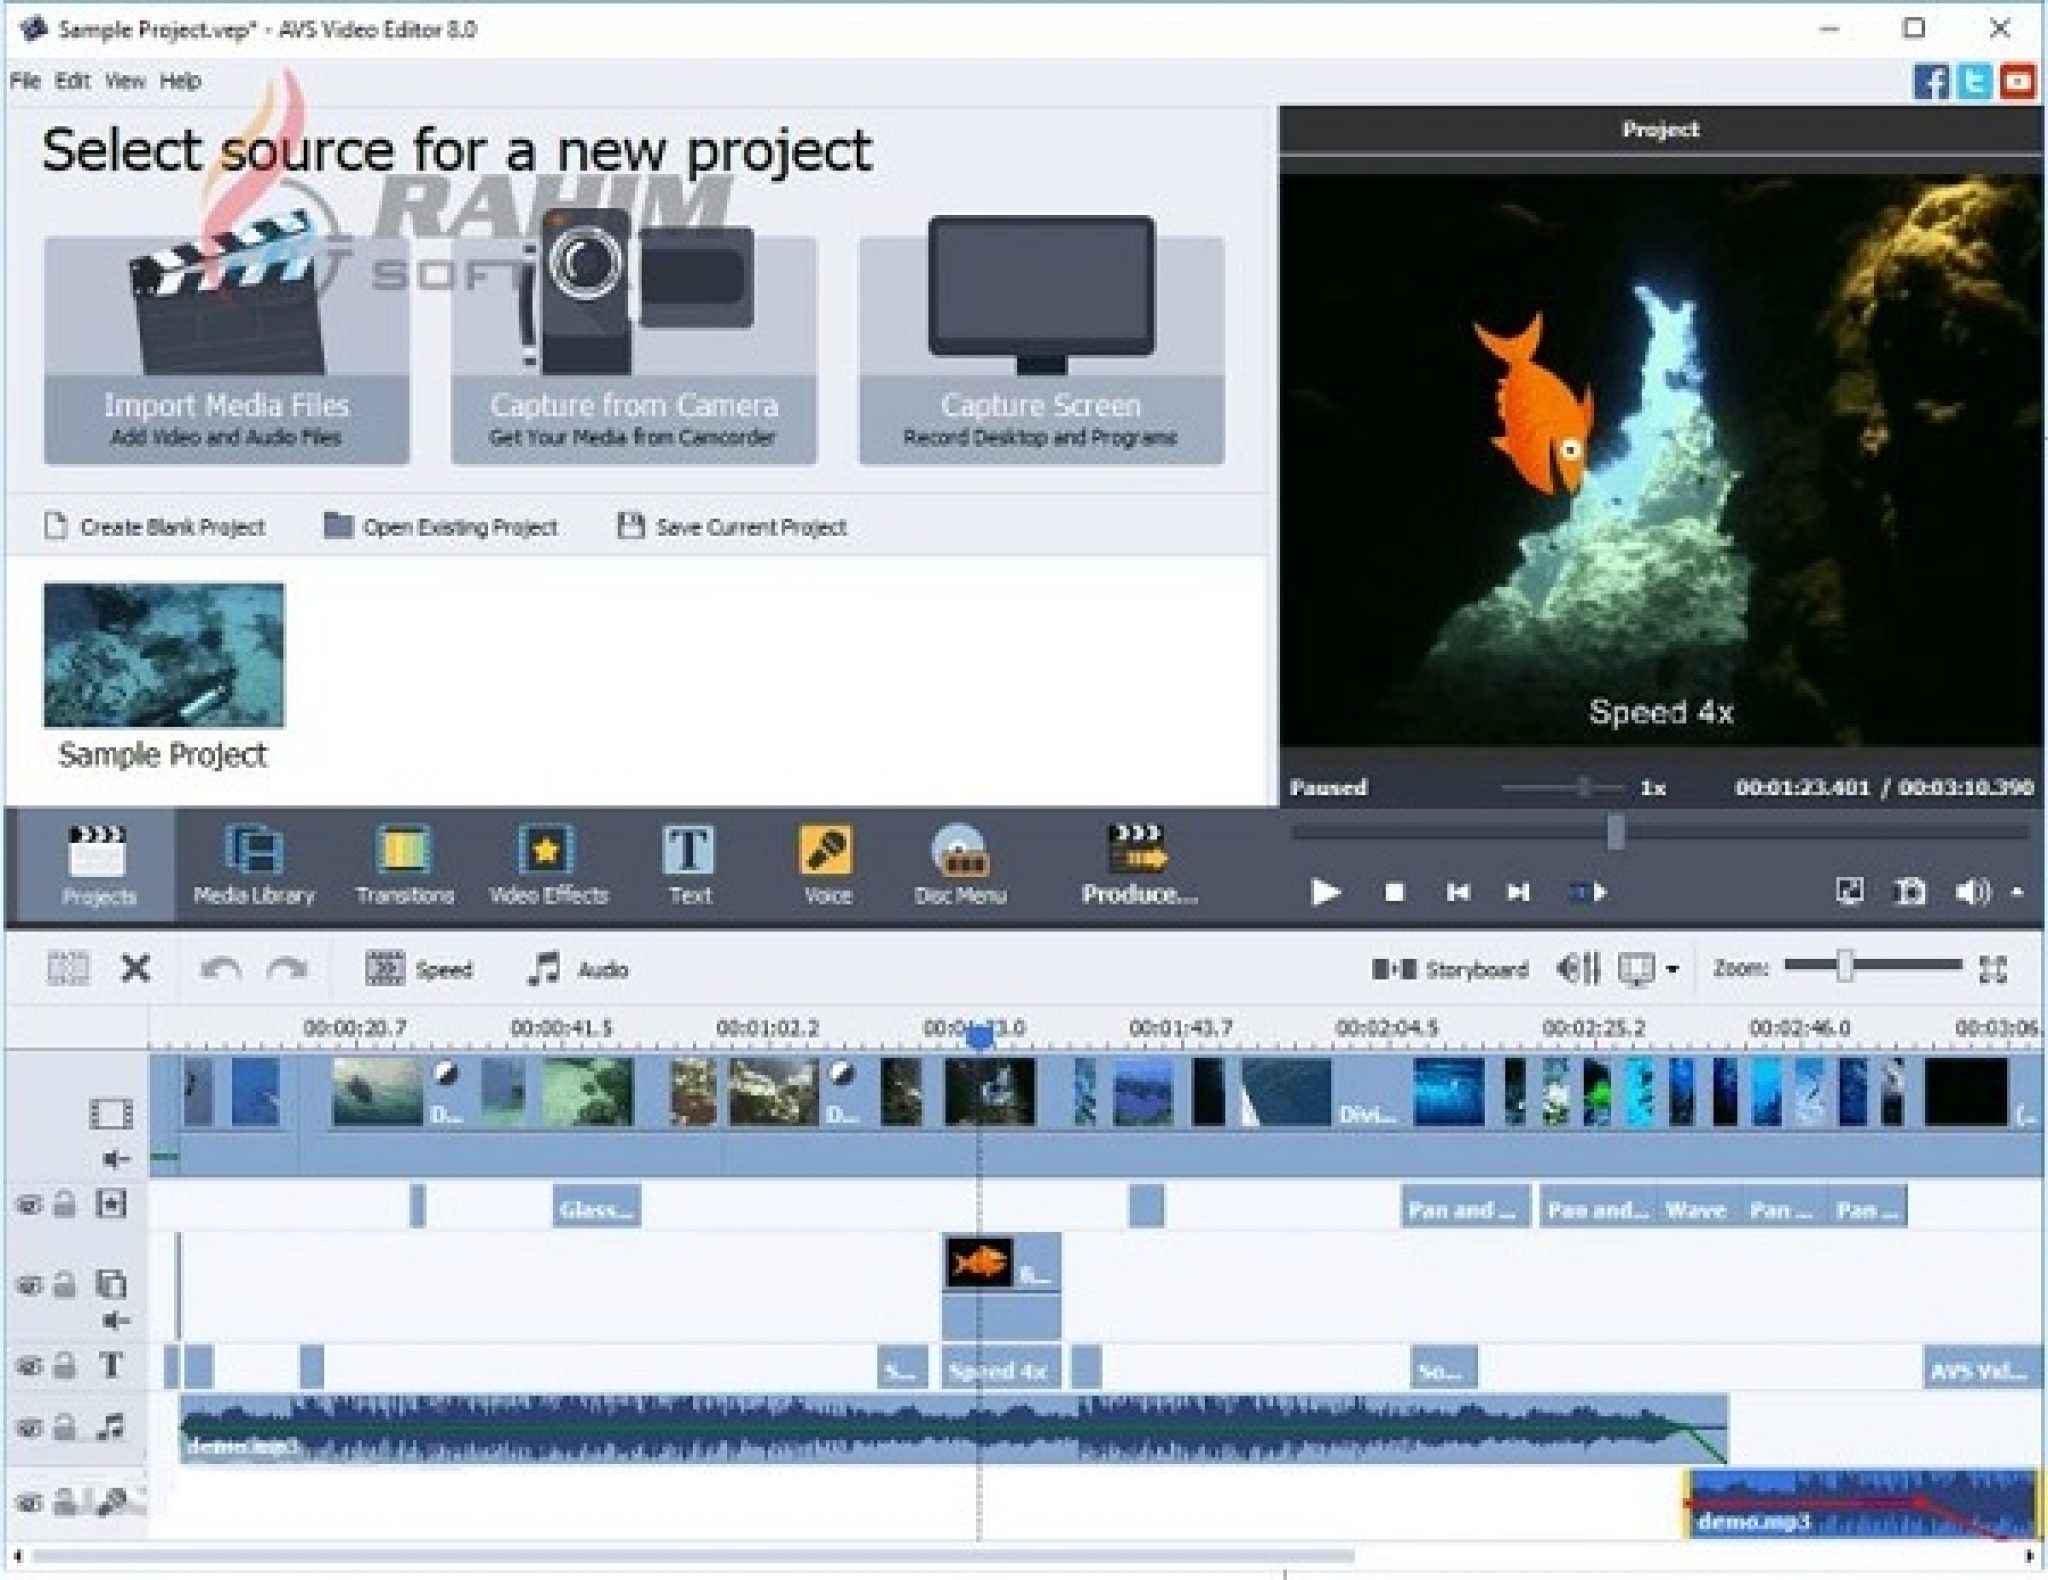 AVS Video ReMaker 6.8.2.269 instal the new version for iphone